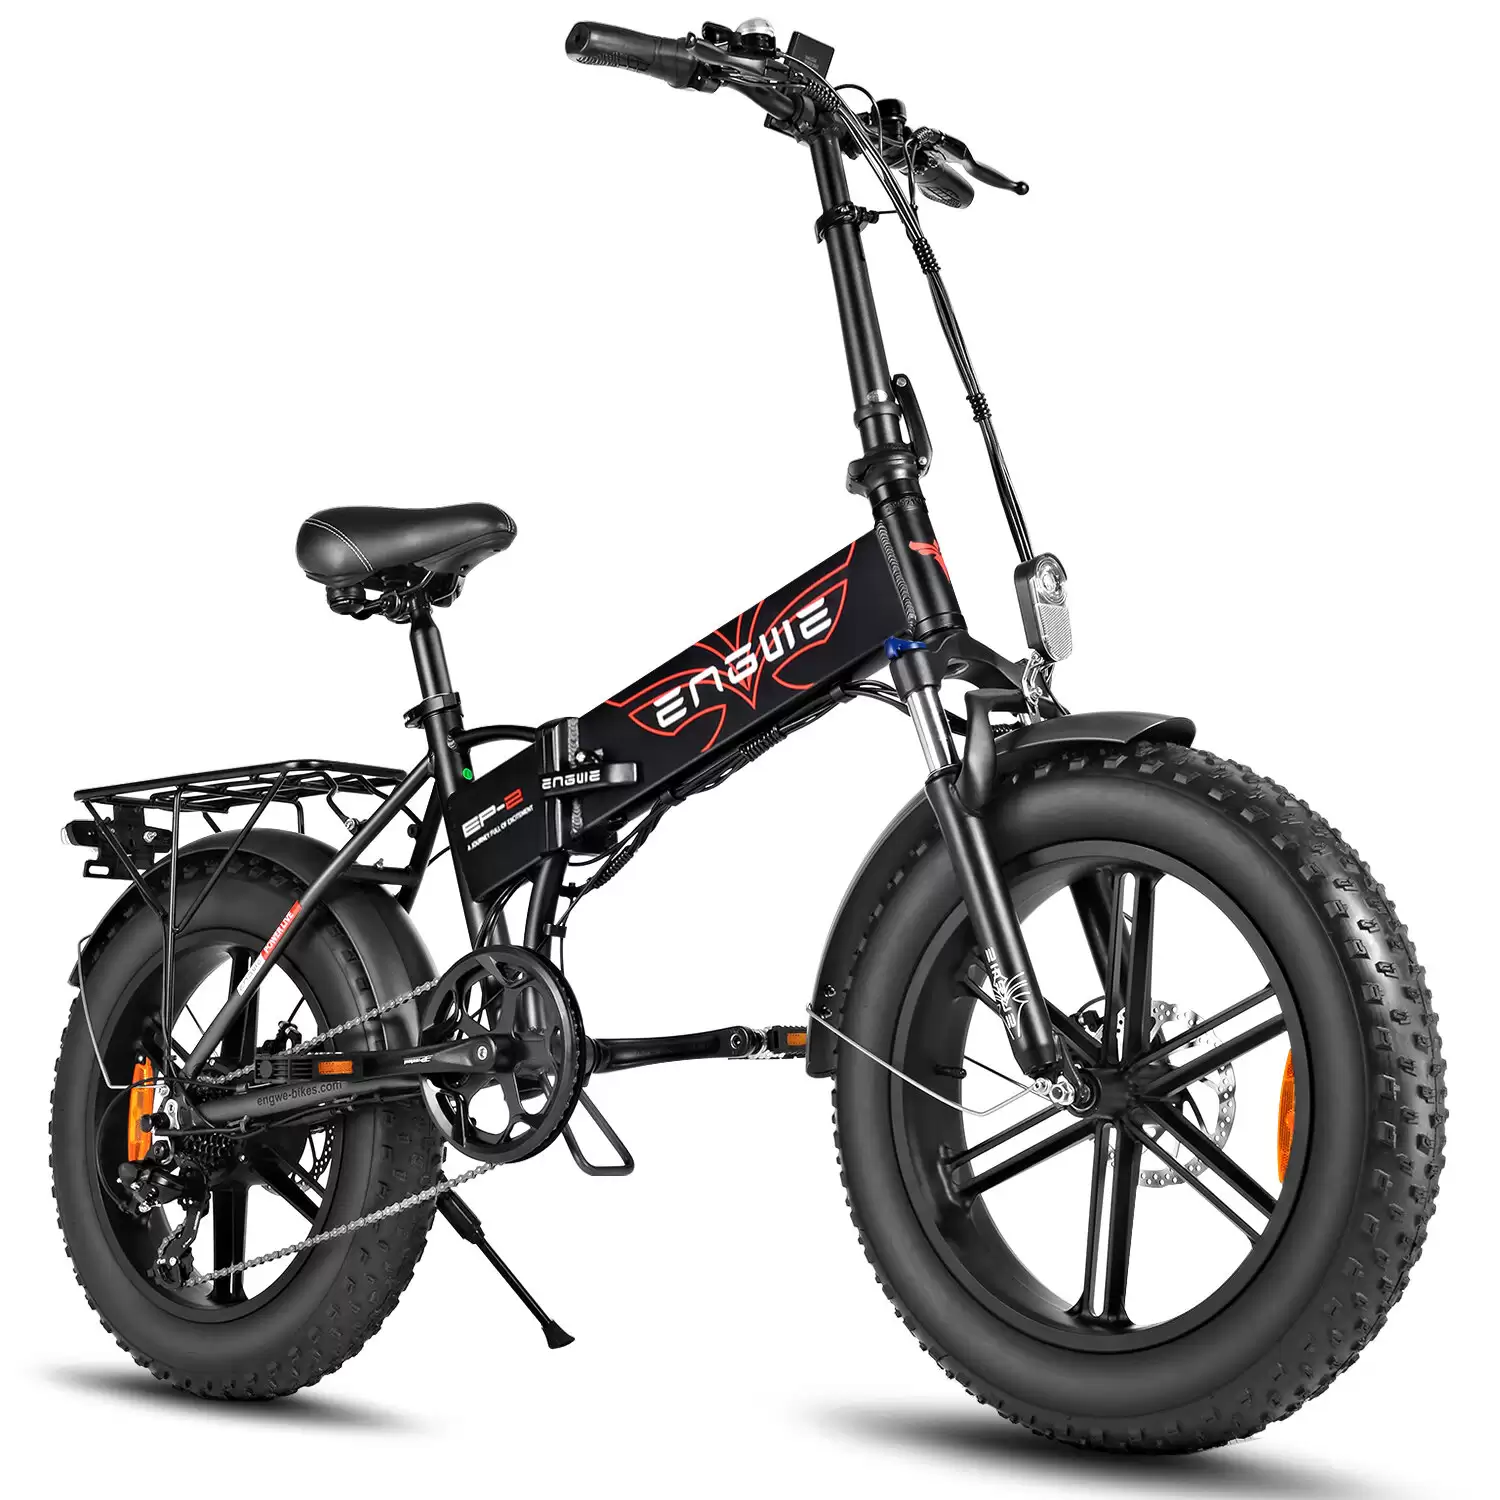 Order In Just $1,099.99 [eu Direct] Engwe Ep-2 48v 12.5ah 500w Folding Electric Bike With This Coupon At Banggood